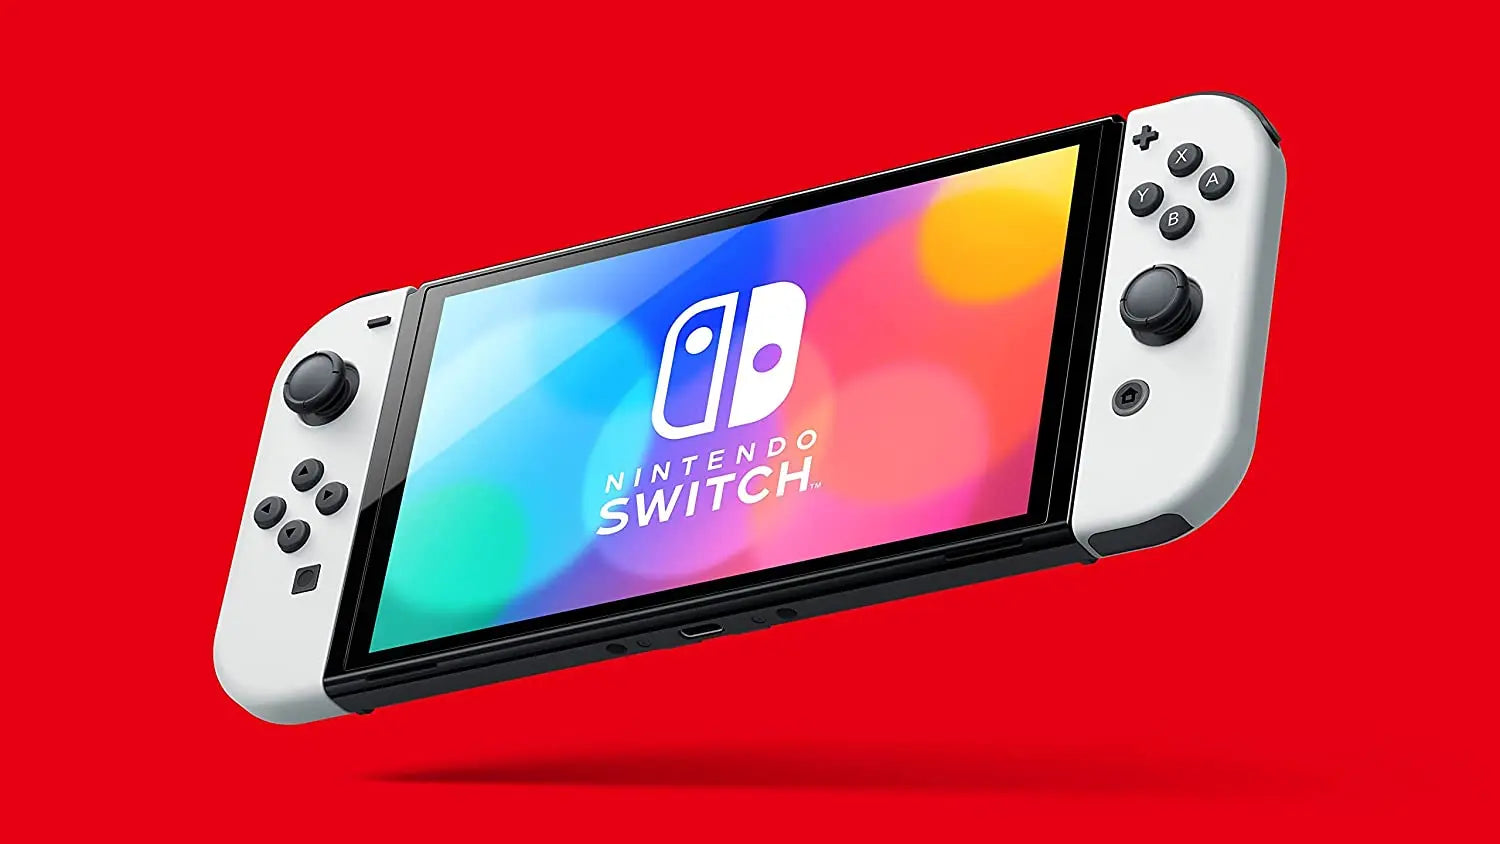 Station d'accueil TV pour Nintendo Switch/Switch OLED, station d